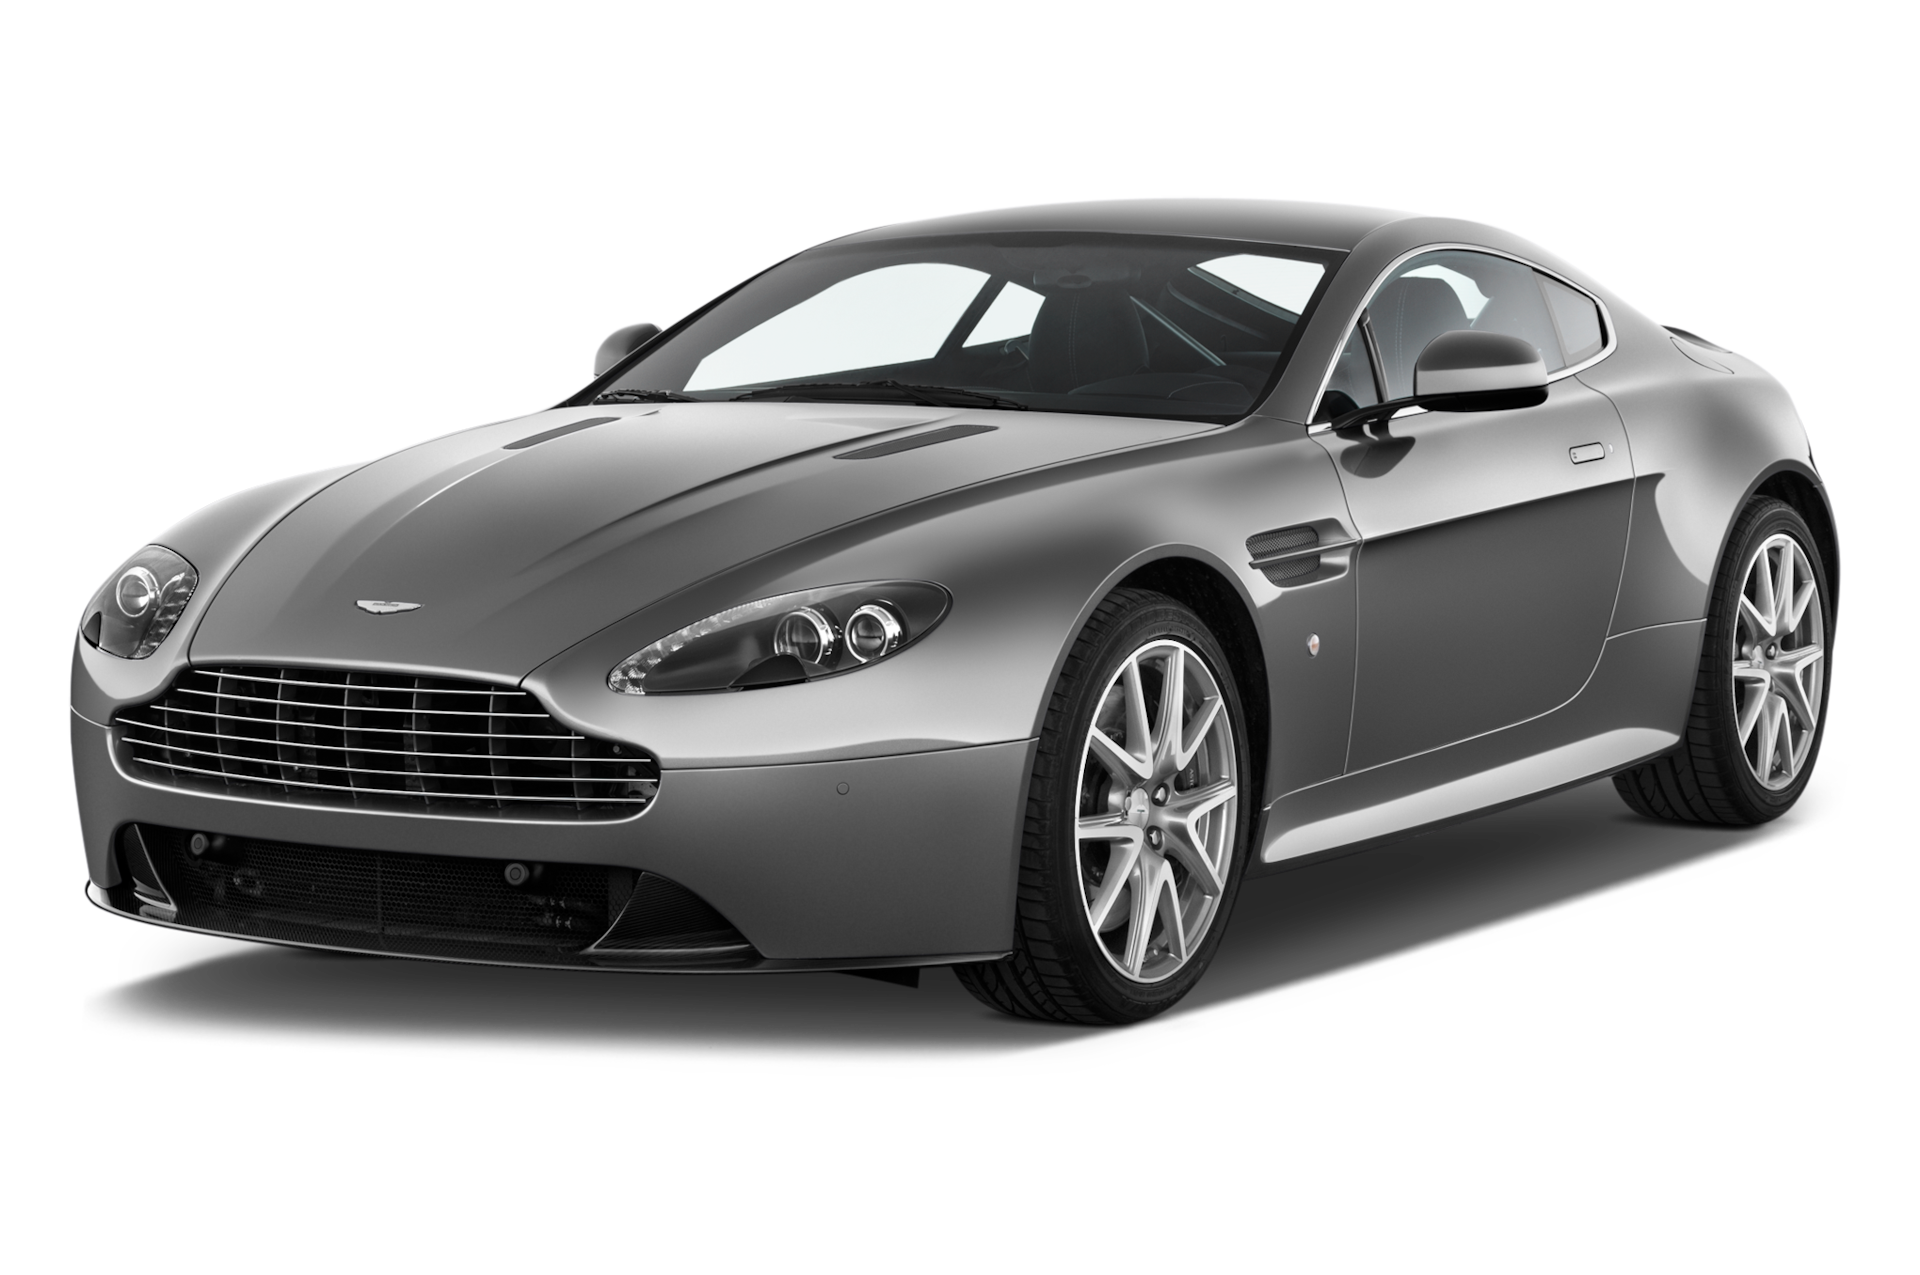 2015 Aston Martin V8 Vantage Prices, Reviews, and Photos - MotorTrend